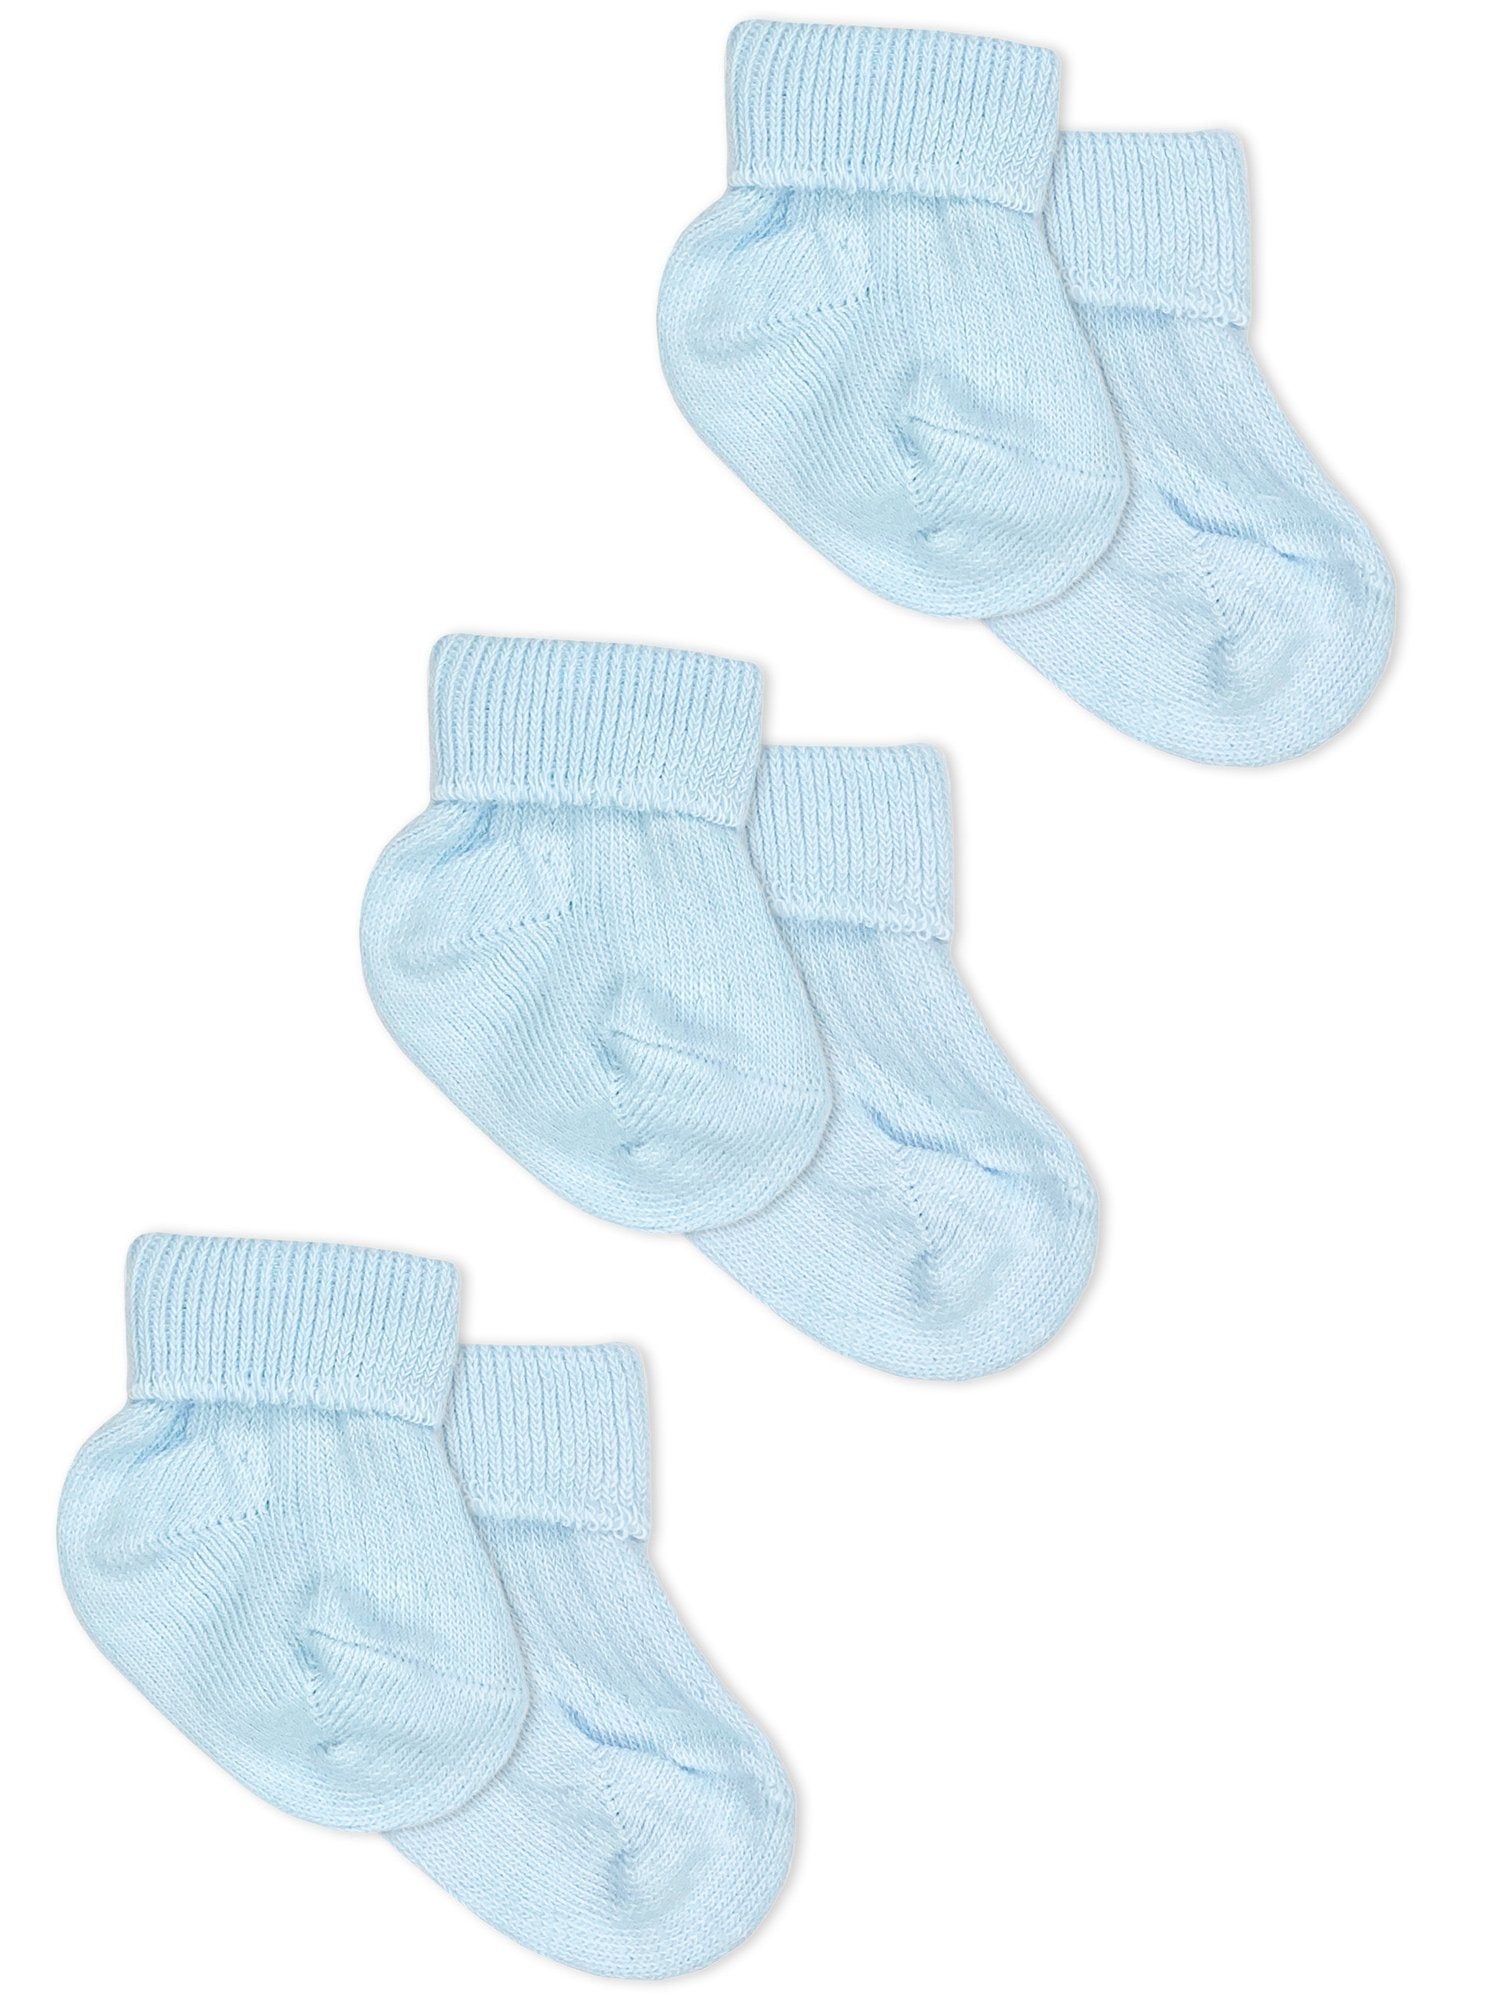 Tiny Baby Socks, Blue, 3 Pack Socks Little Mouse Baby Clothing & Gifts 